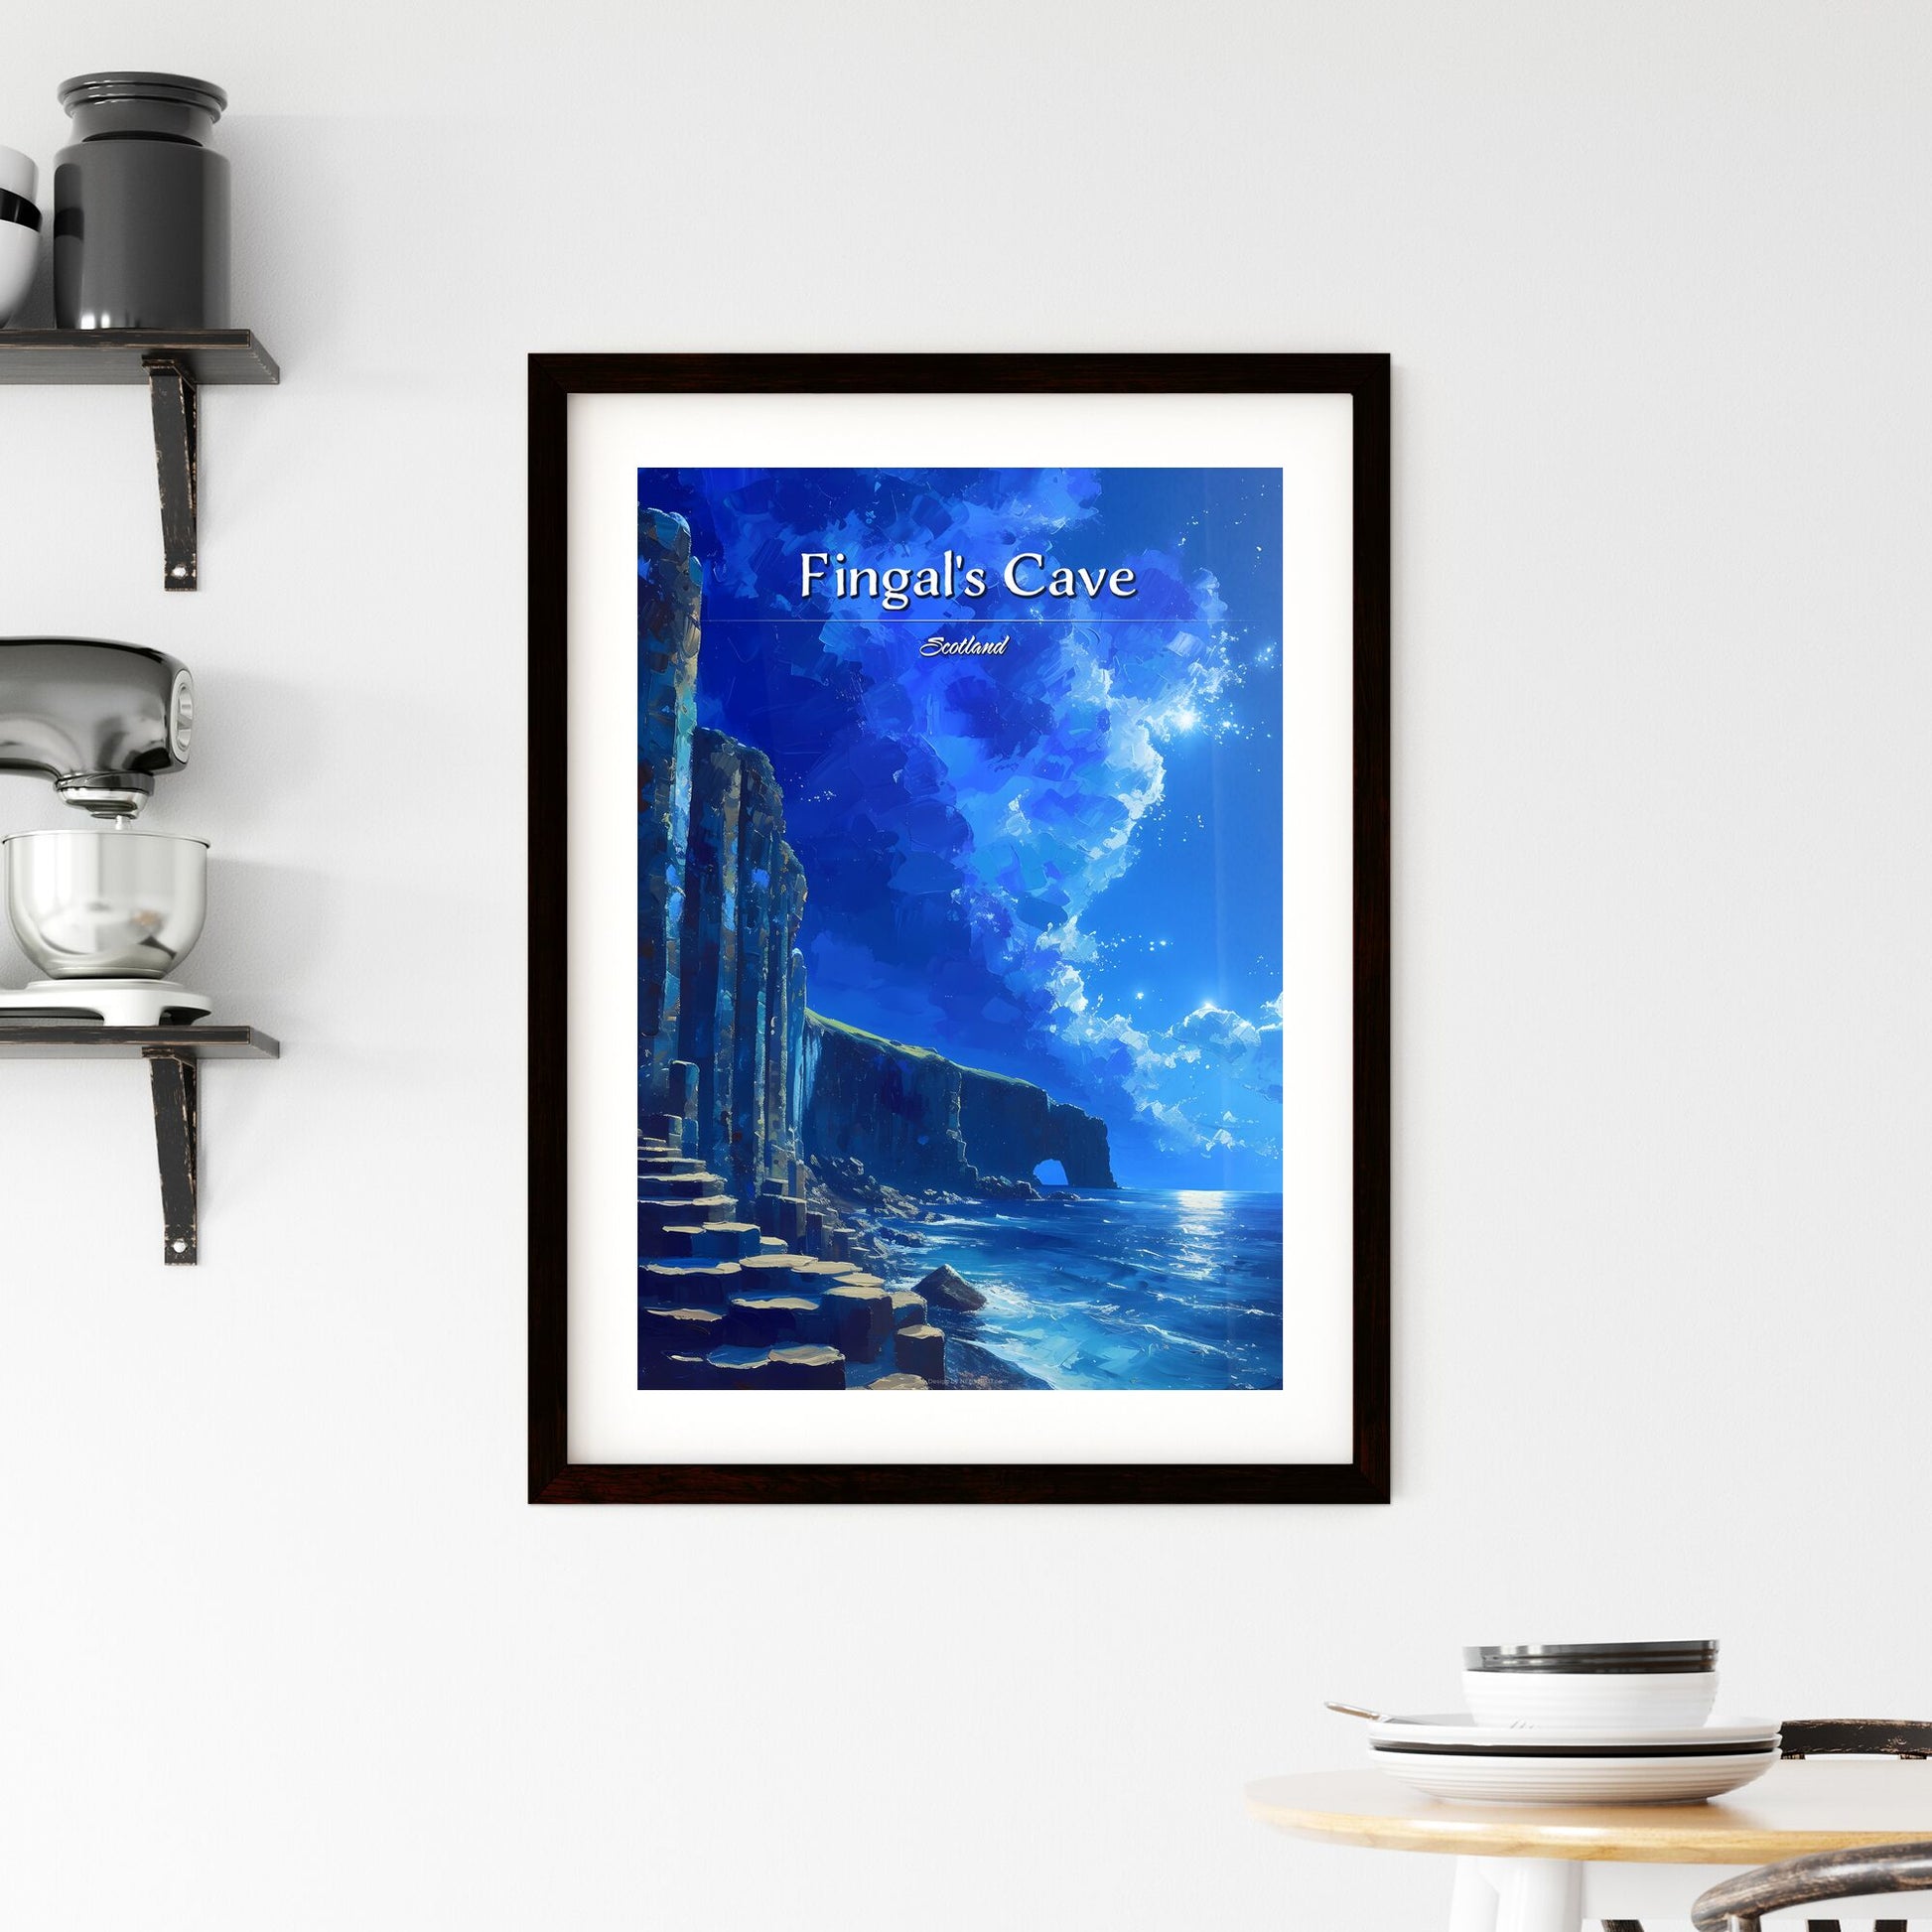 Fingal_s Cave, Scotland - Art print of a rock cliff with steps and a body of water Default Title